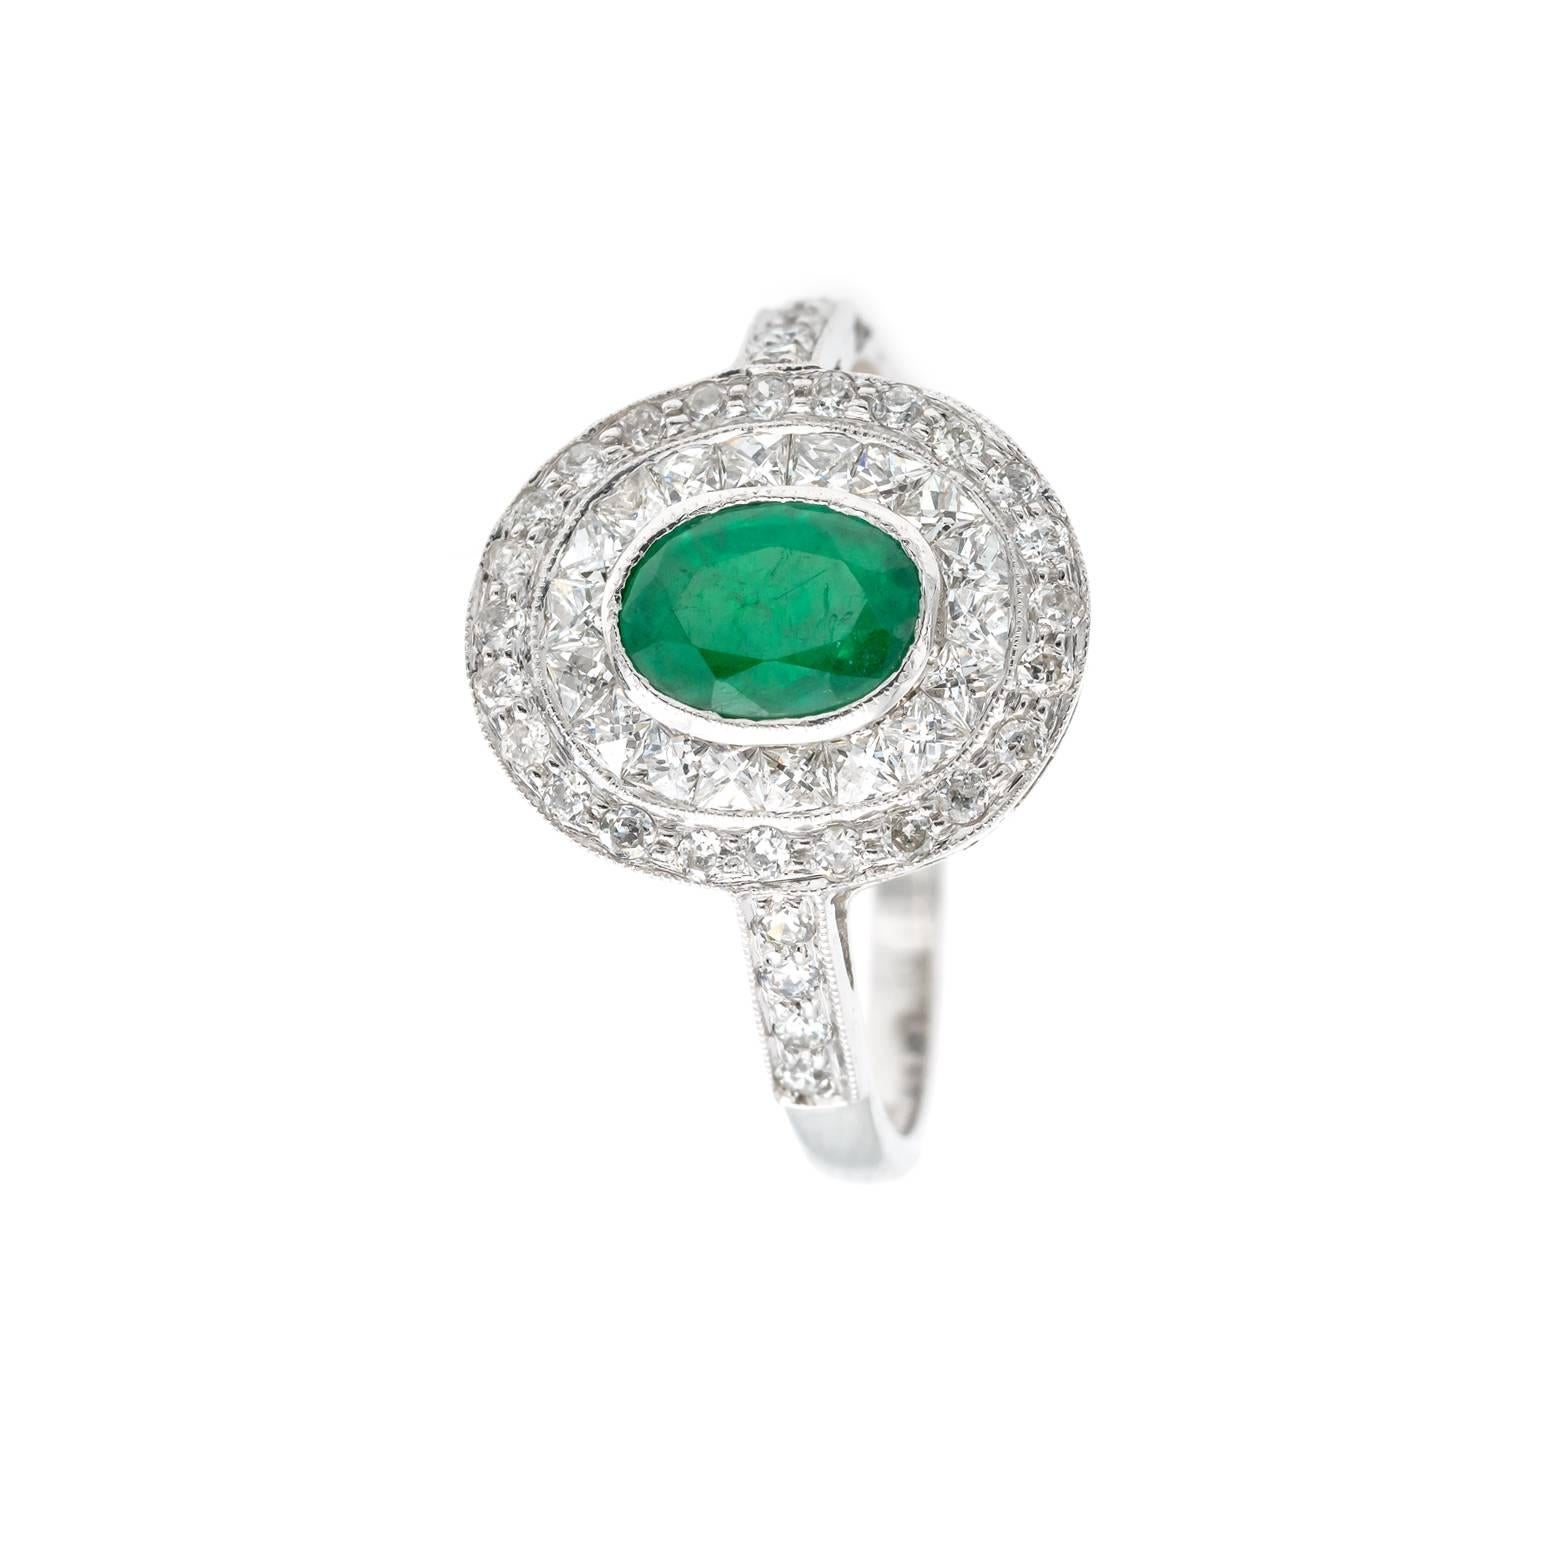 This stunning and sparkling emerald and diamond ring glows from across the room. Circa 1935 made of 18K white gold the emerald is approx 0.6 carats and the total weight for the diamonds are approximately 0.9 carats. Size 7.25 and may be sized.